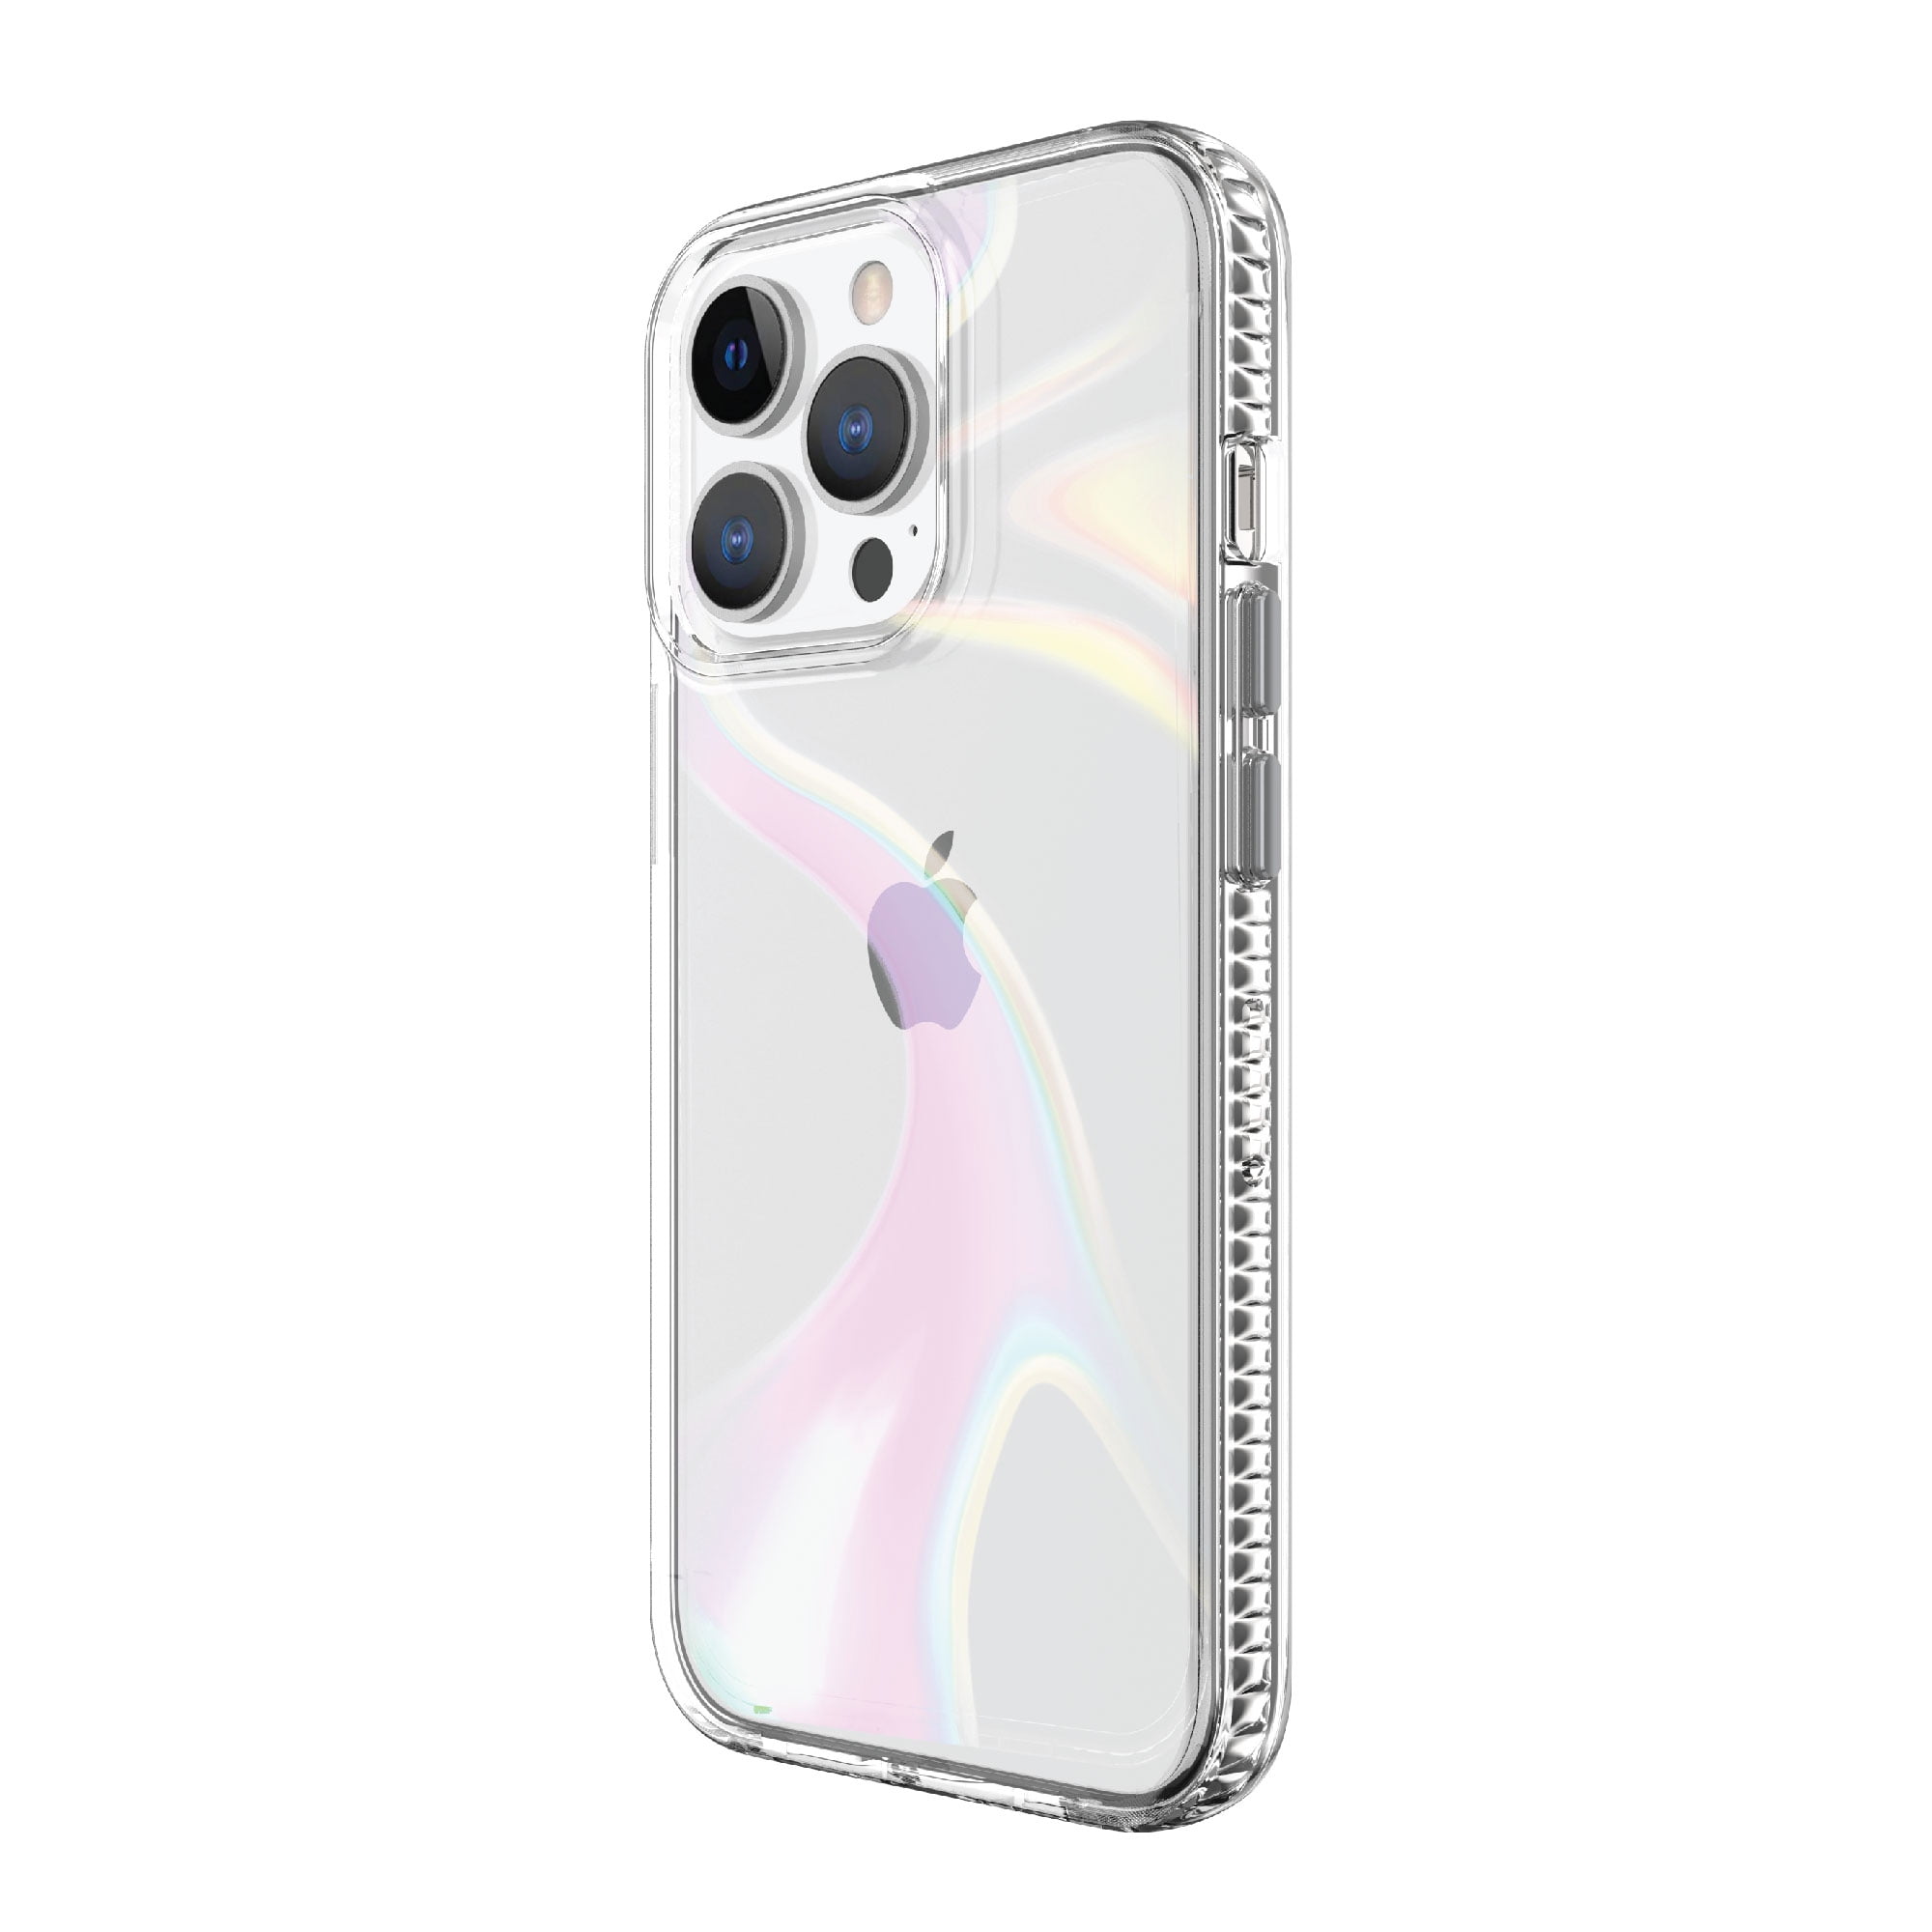 onn. Phone Case for iPhone 13 Pro Max / iPhone 12 Pro Max - Iridescent  Illusion